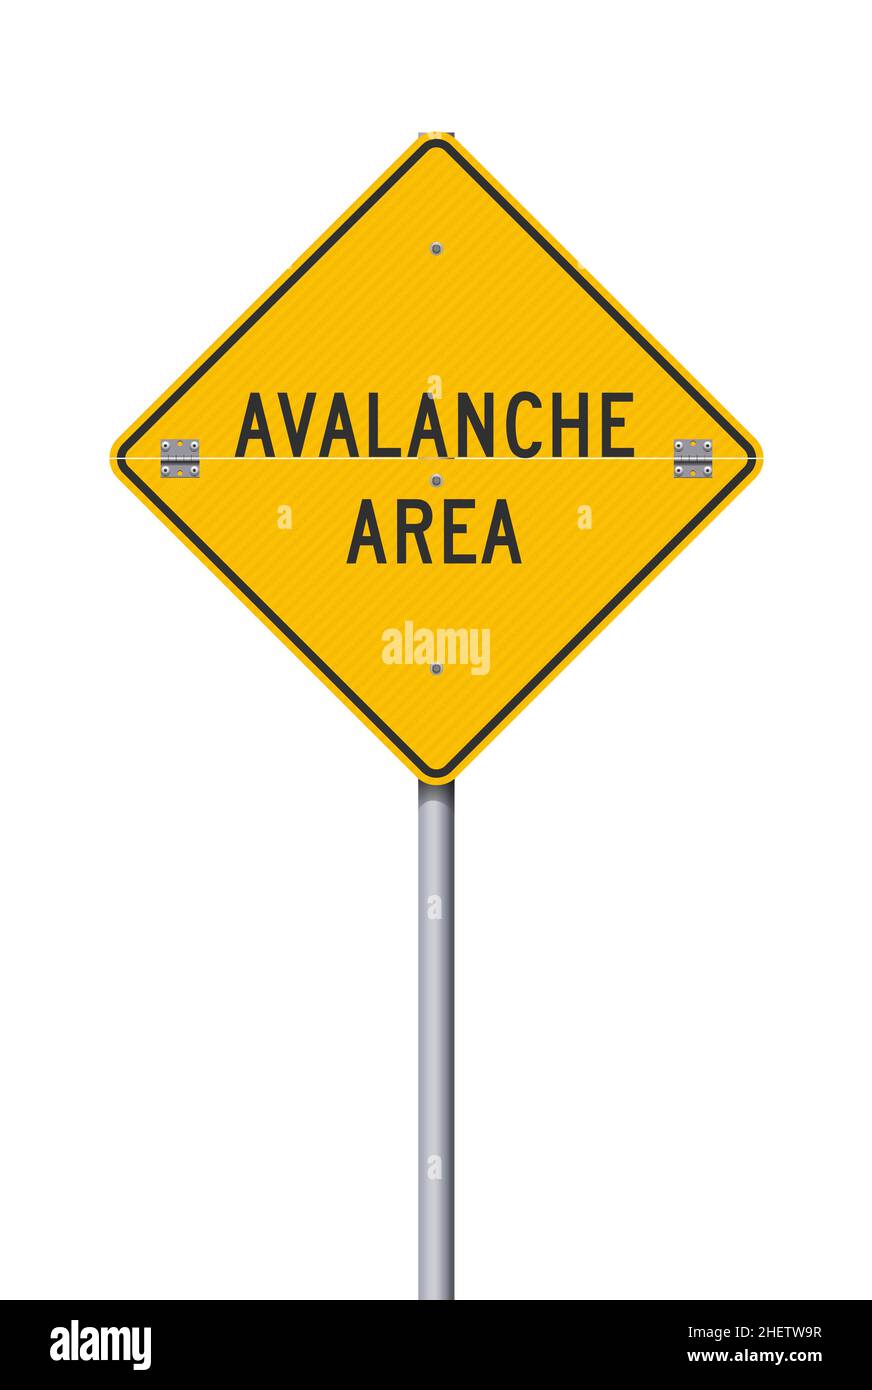 Vector illustration of the avalanche area yellow road sign Stock Vector